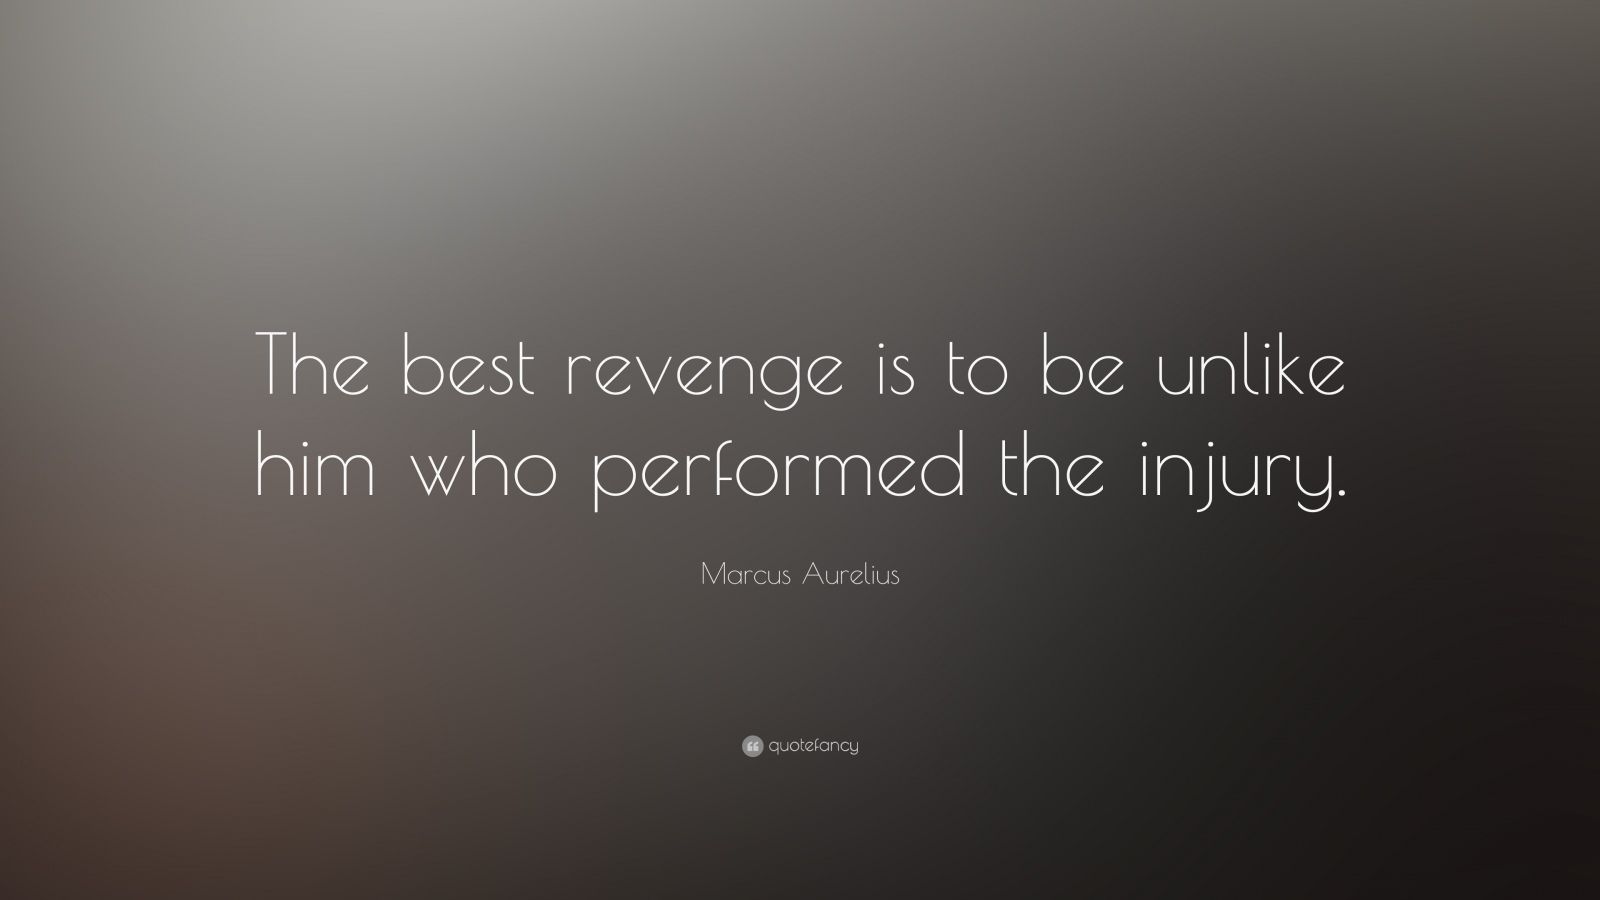 Marcus Aurelius Quote “The best revenge is to be unlike him who performed the